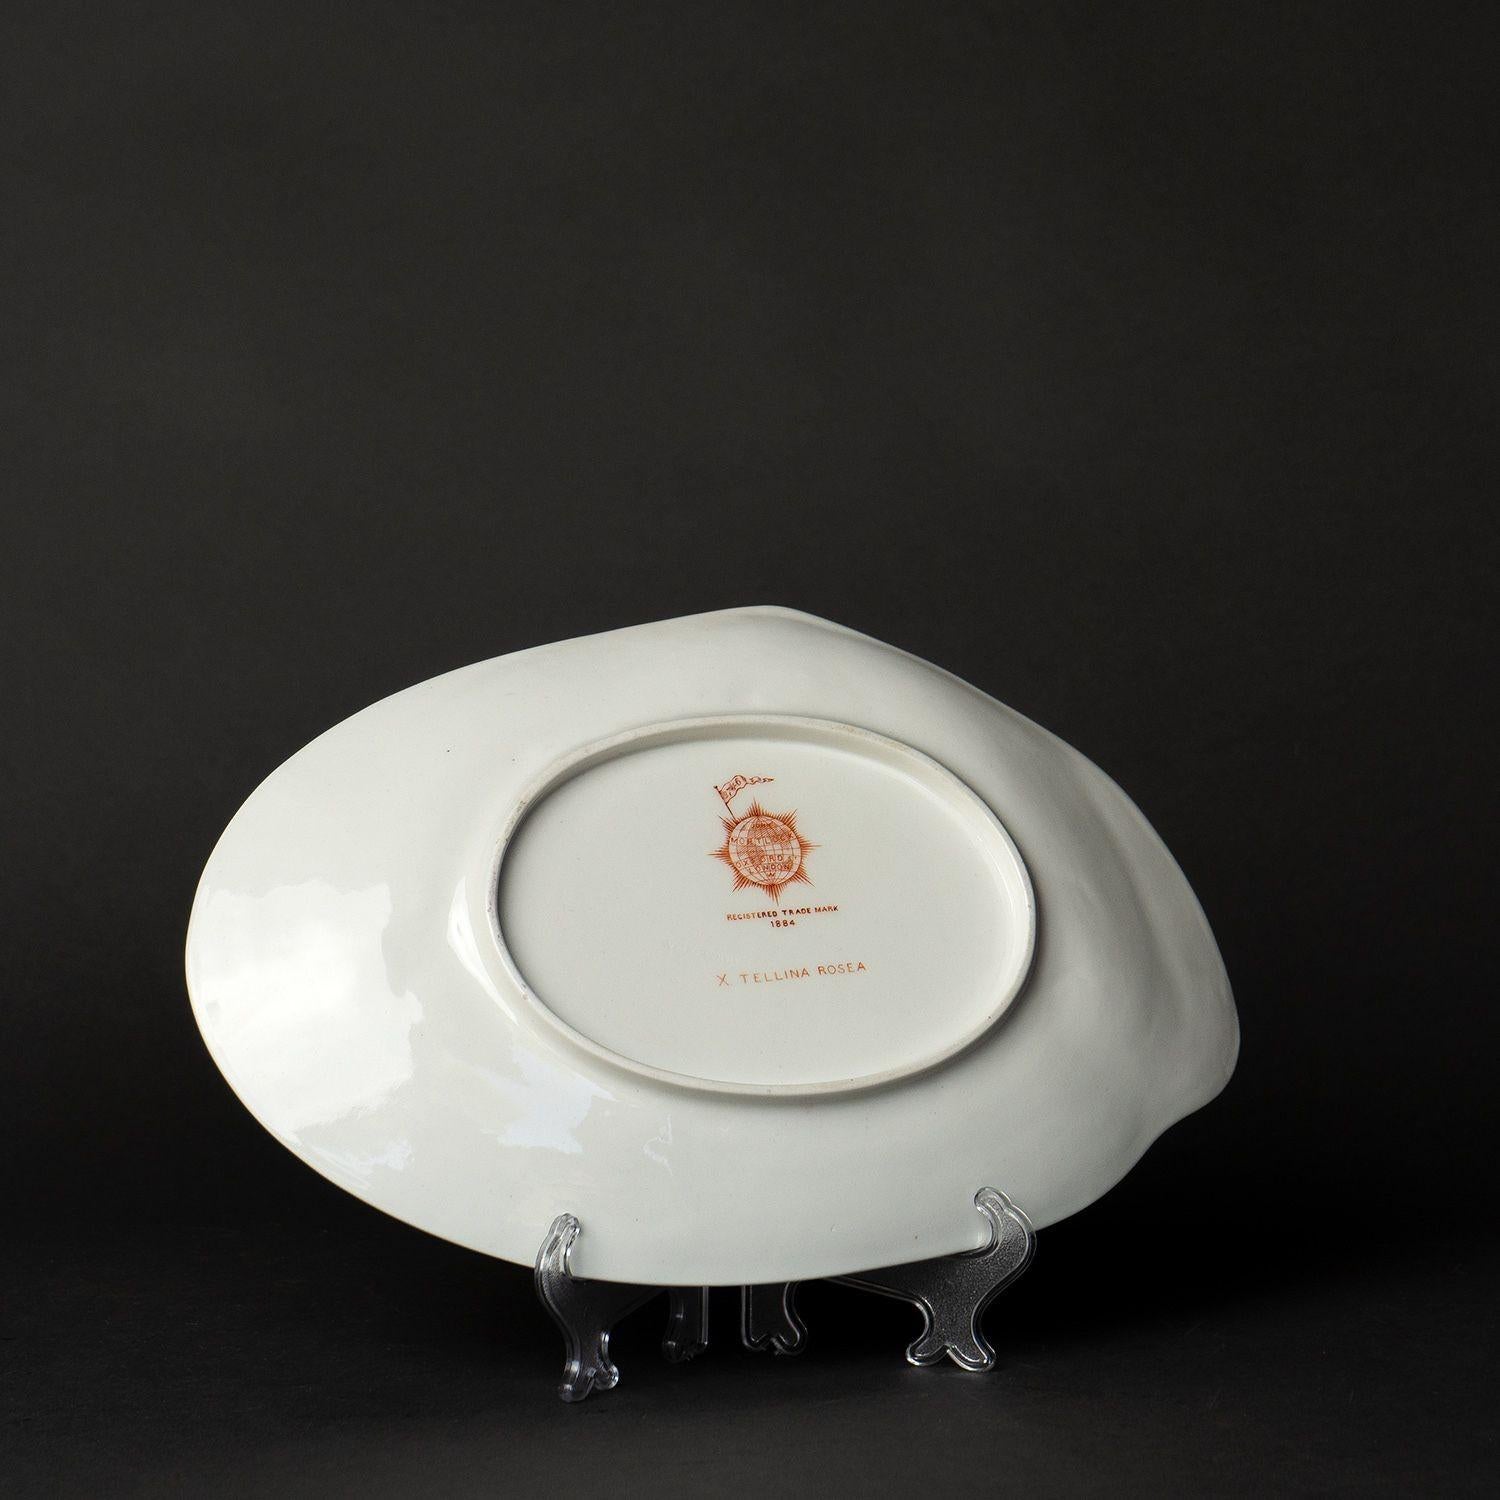 Pink Porcelain 'Nautilus' Dessert Service by Wedgwood for John Mortlock, 1880s For Sale 9